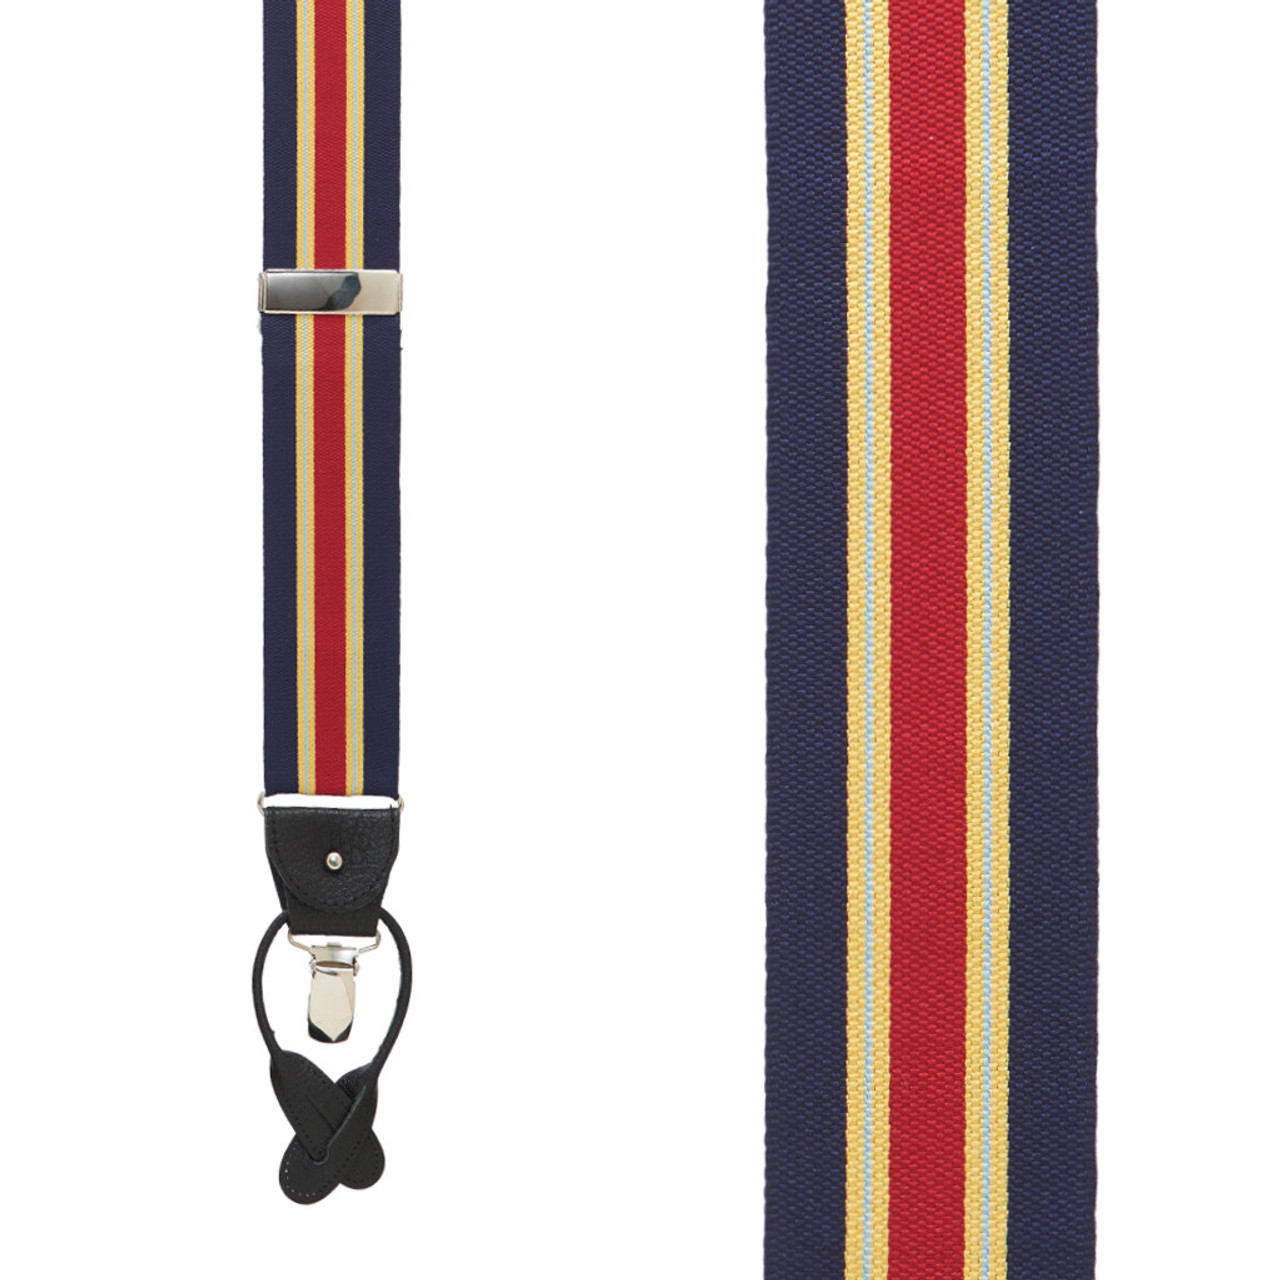 YELLOW/NAVY Variable Stripes Convertible Suspenders